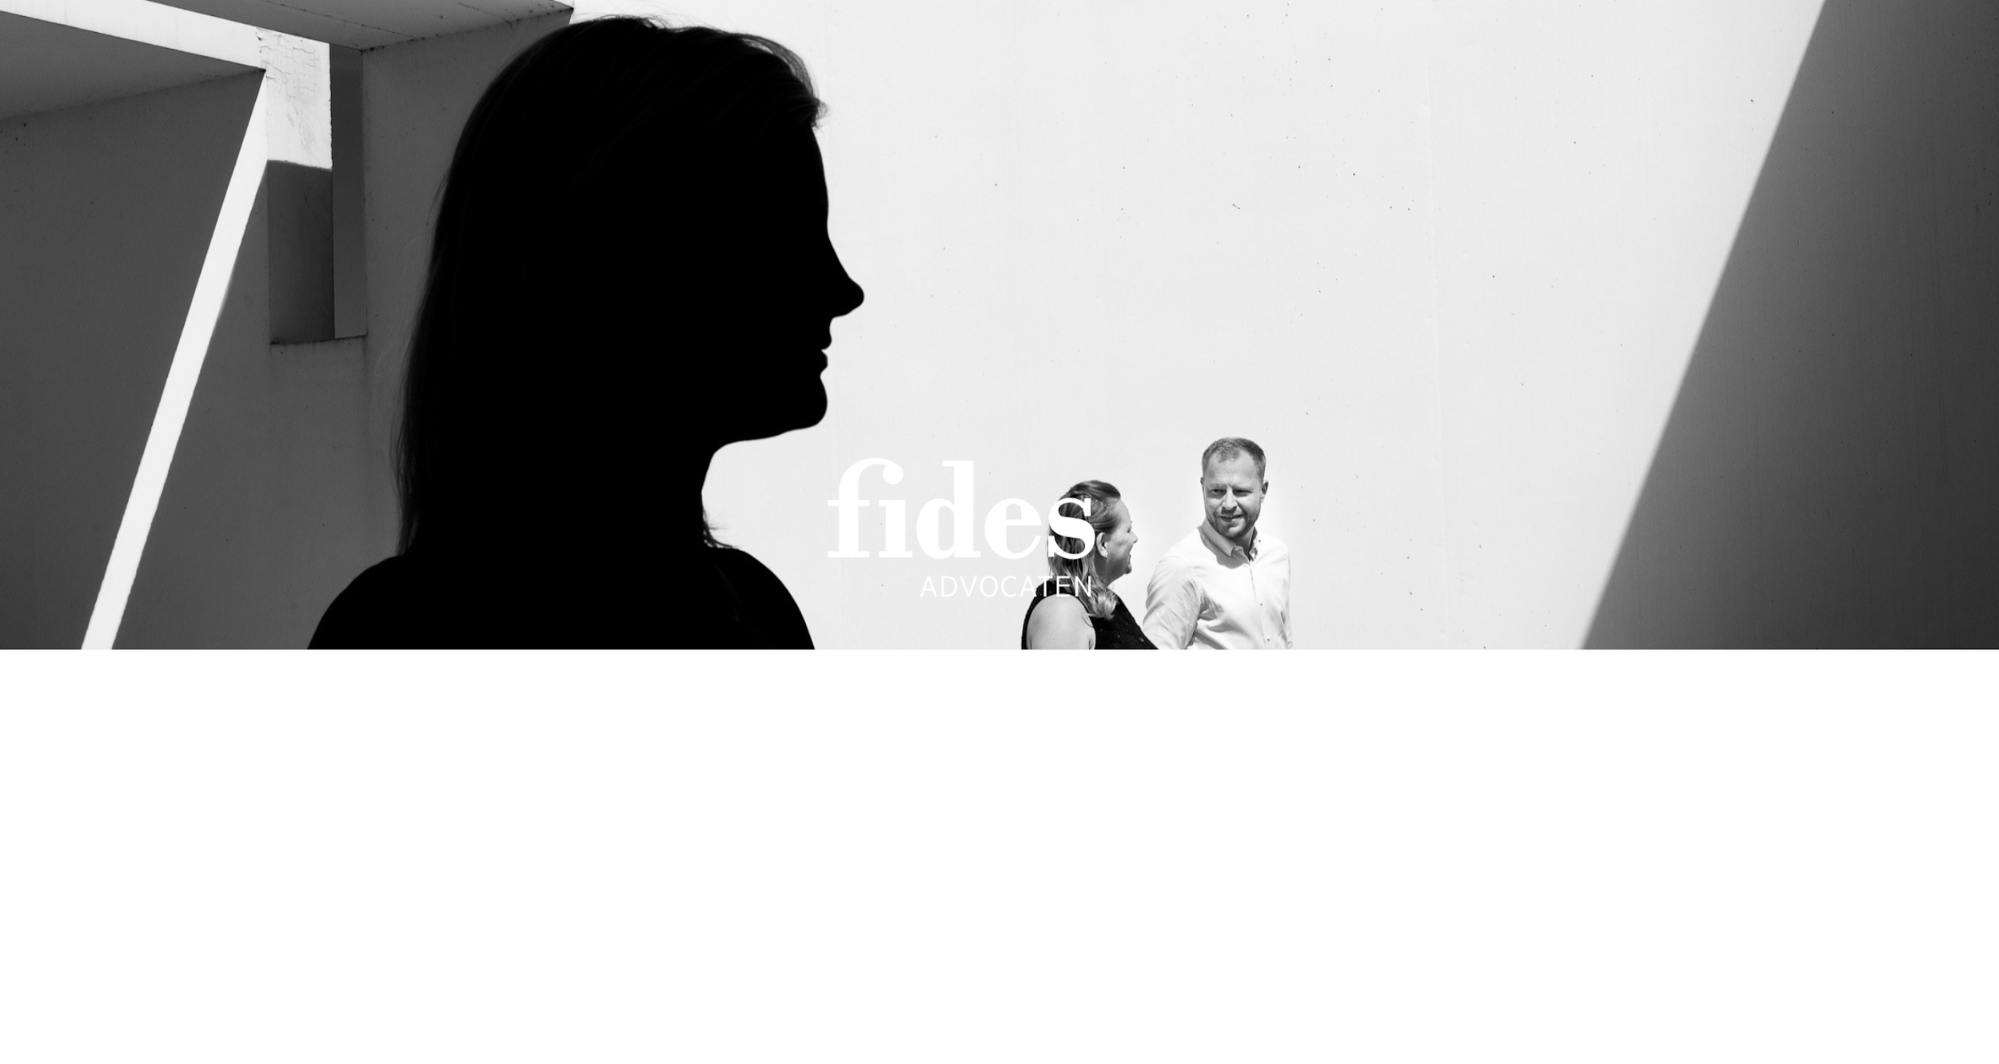 professional black and white photography on the fides website 